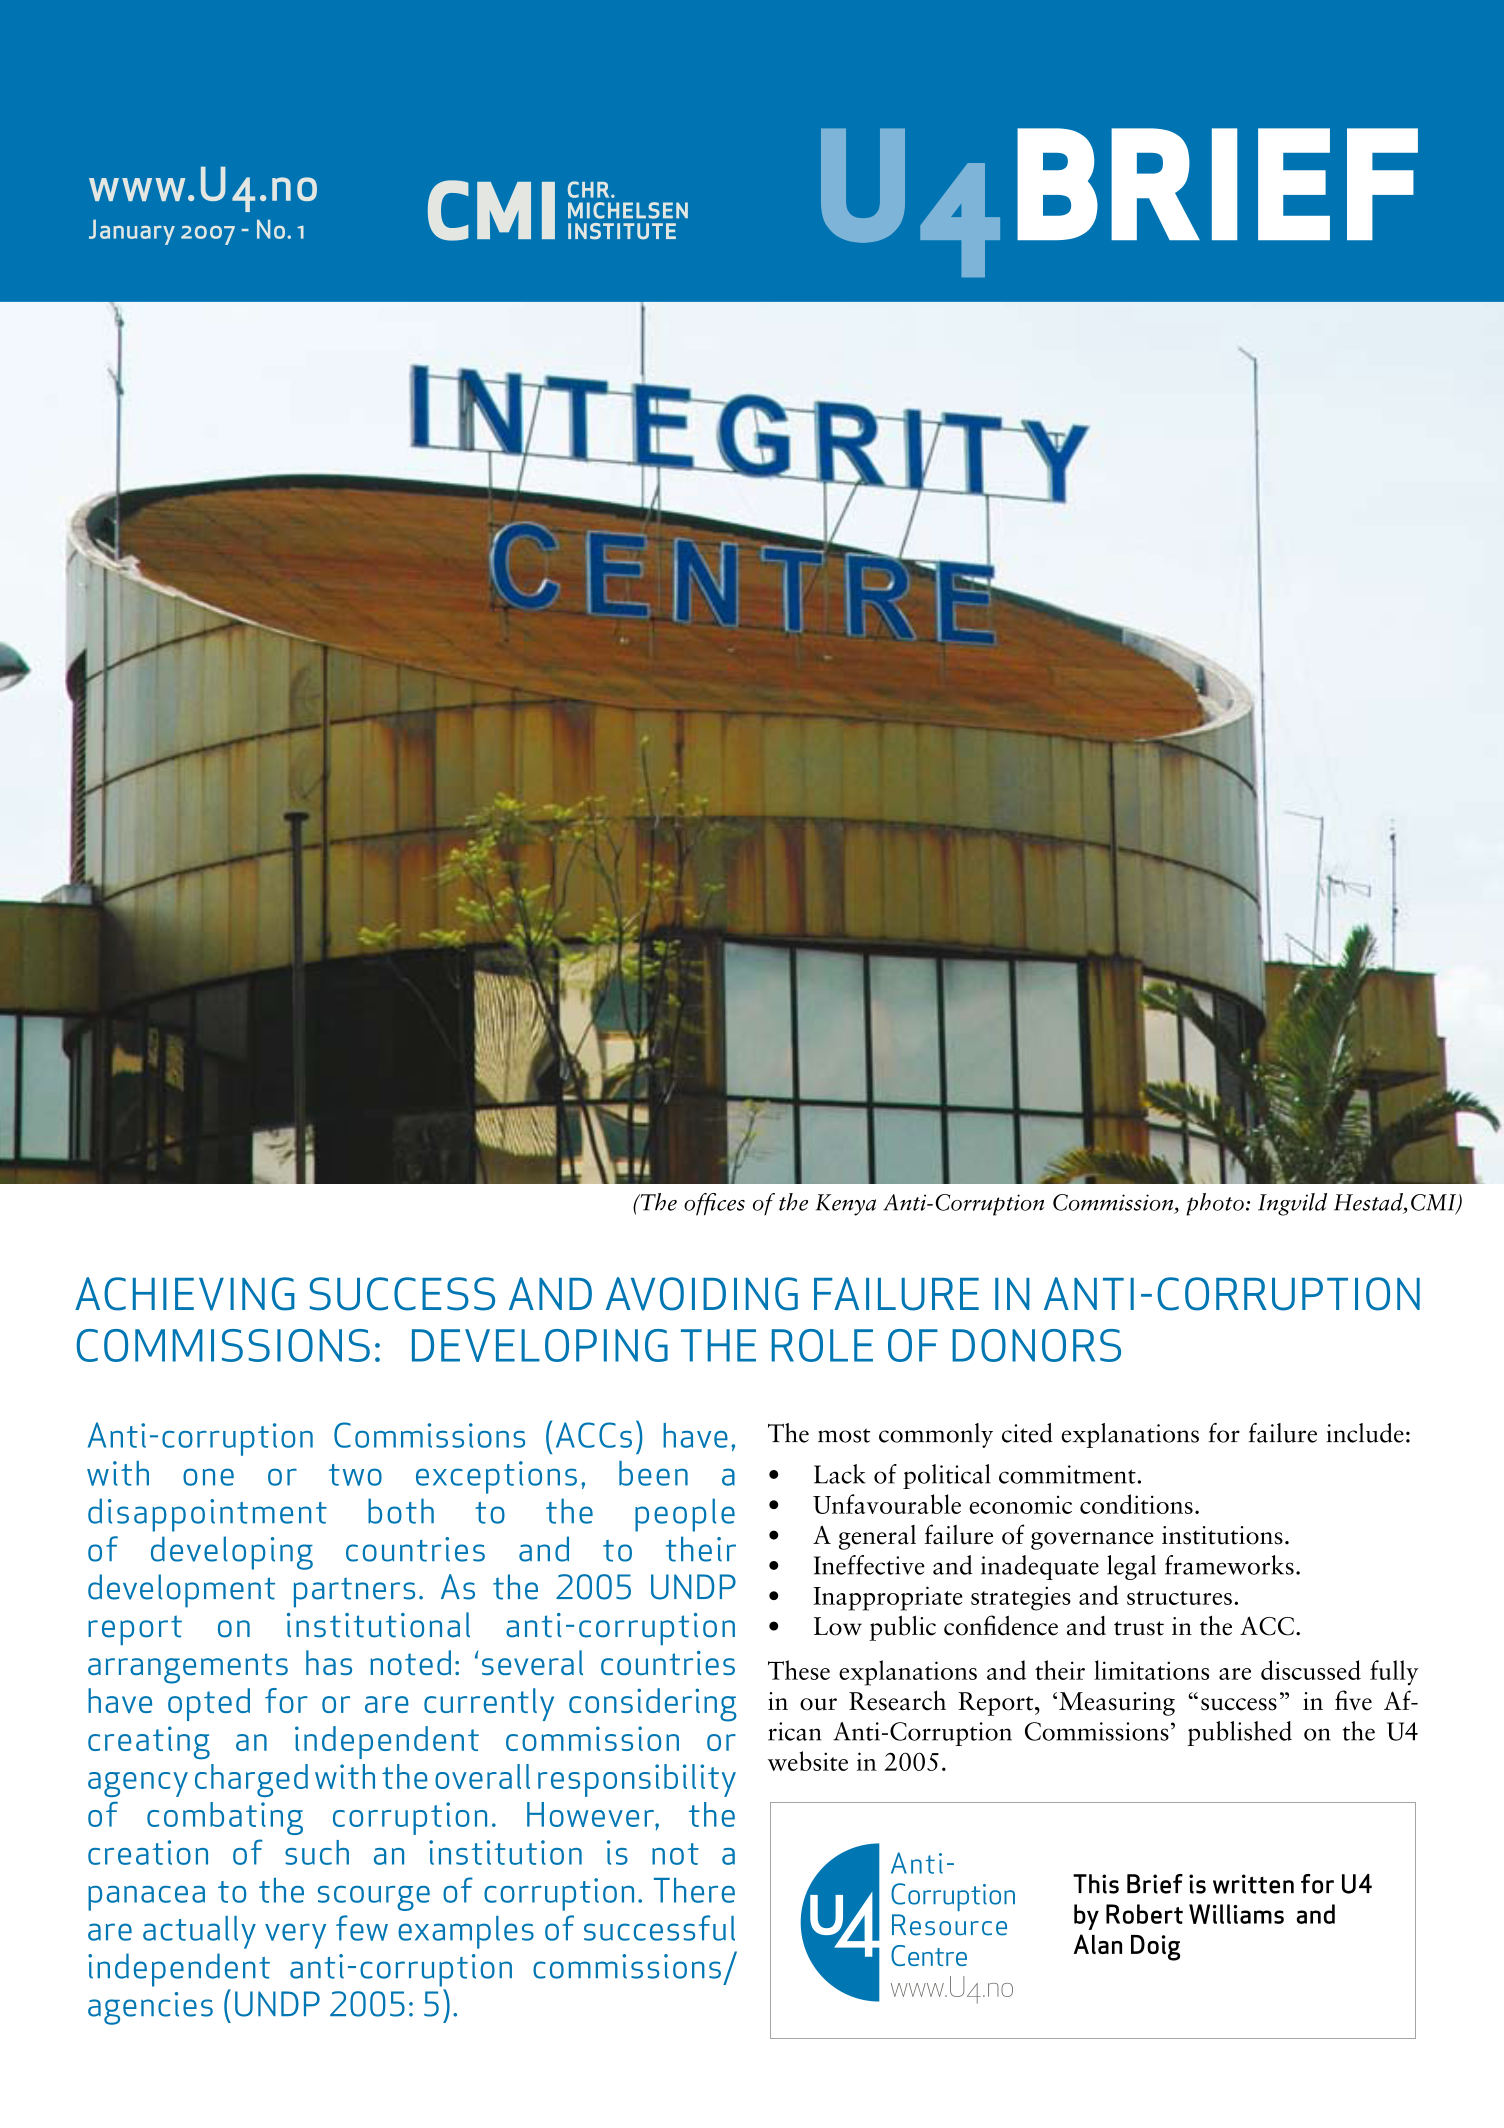 Achieving success and avoiding failure in anti-corruption commissions: Developing the role of donors